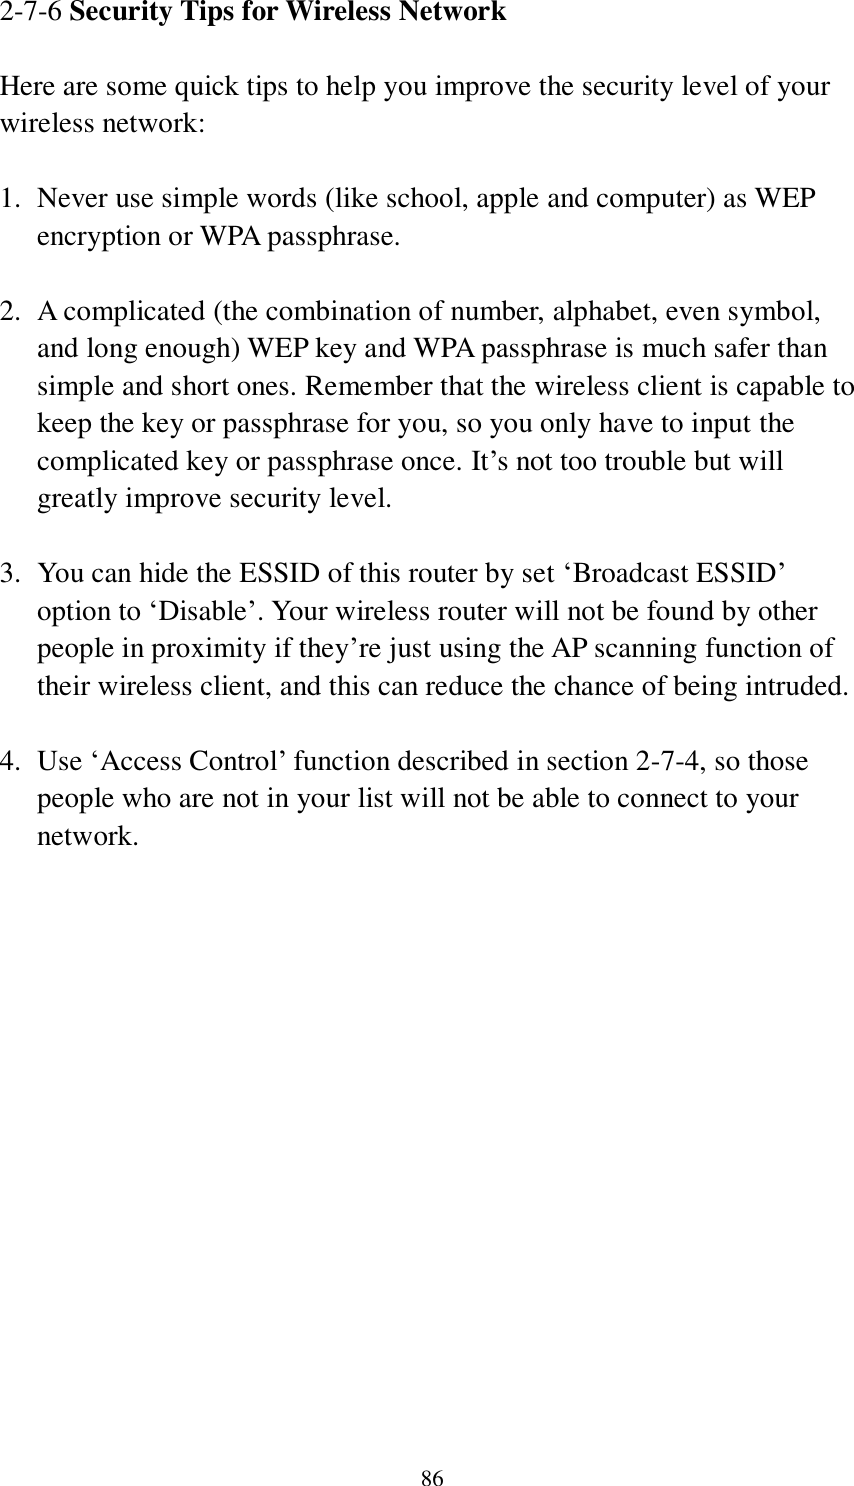 86 2-7-6 Security Tips for Wireless Network  Here are some quick tips to help you improve the security level of your wireless network:  1. Never use simple words (like school, apple and computer) as WEP encryption or WPA passphrase.  2. A complicated (the combination of number, alphabet, even symbol, and long enough) WEP key and WPA passphrase is much safer than simple and short ones. Remember that the wireless client is capable to keep the key or passphrase for you, so you only have to input the complicated key or passphrase once. It‟s not too trouble but will greatly improve security level.  3. You can hide the ESSID of this router by set „Broadcast ESSID‟ option to „Disable‟. Your wireless router will not be found by other people in proximity if they‟re just using the AP scanning function of their wireless client, and this can reduce the chance of being intruded.  4. Use „Access Control‟ function described in section 2-7-4, so those people who are not in your list will not be able to connect to your network. 